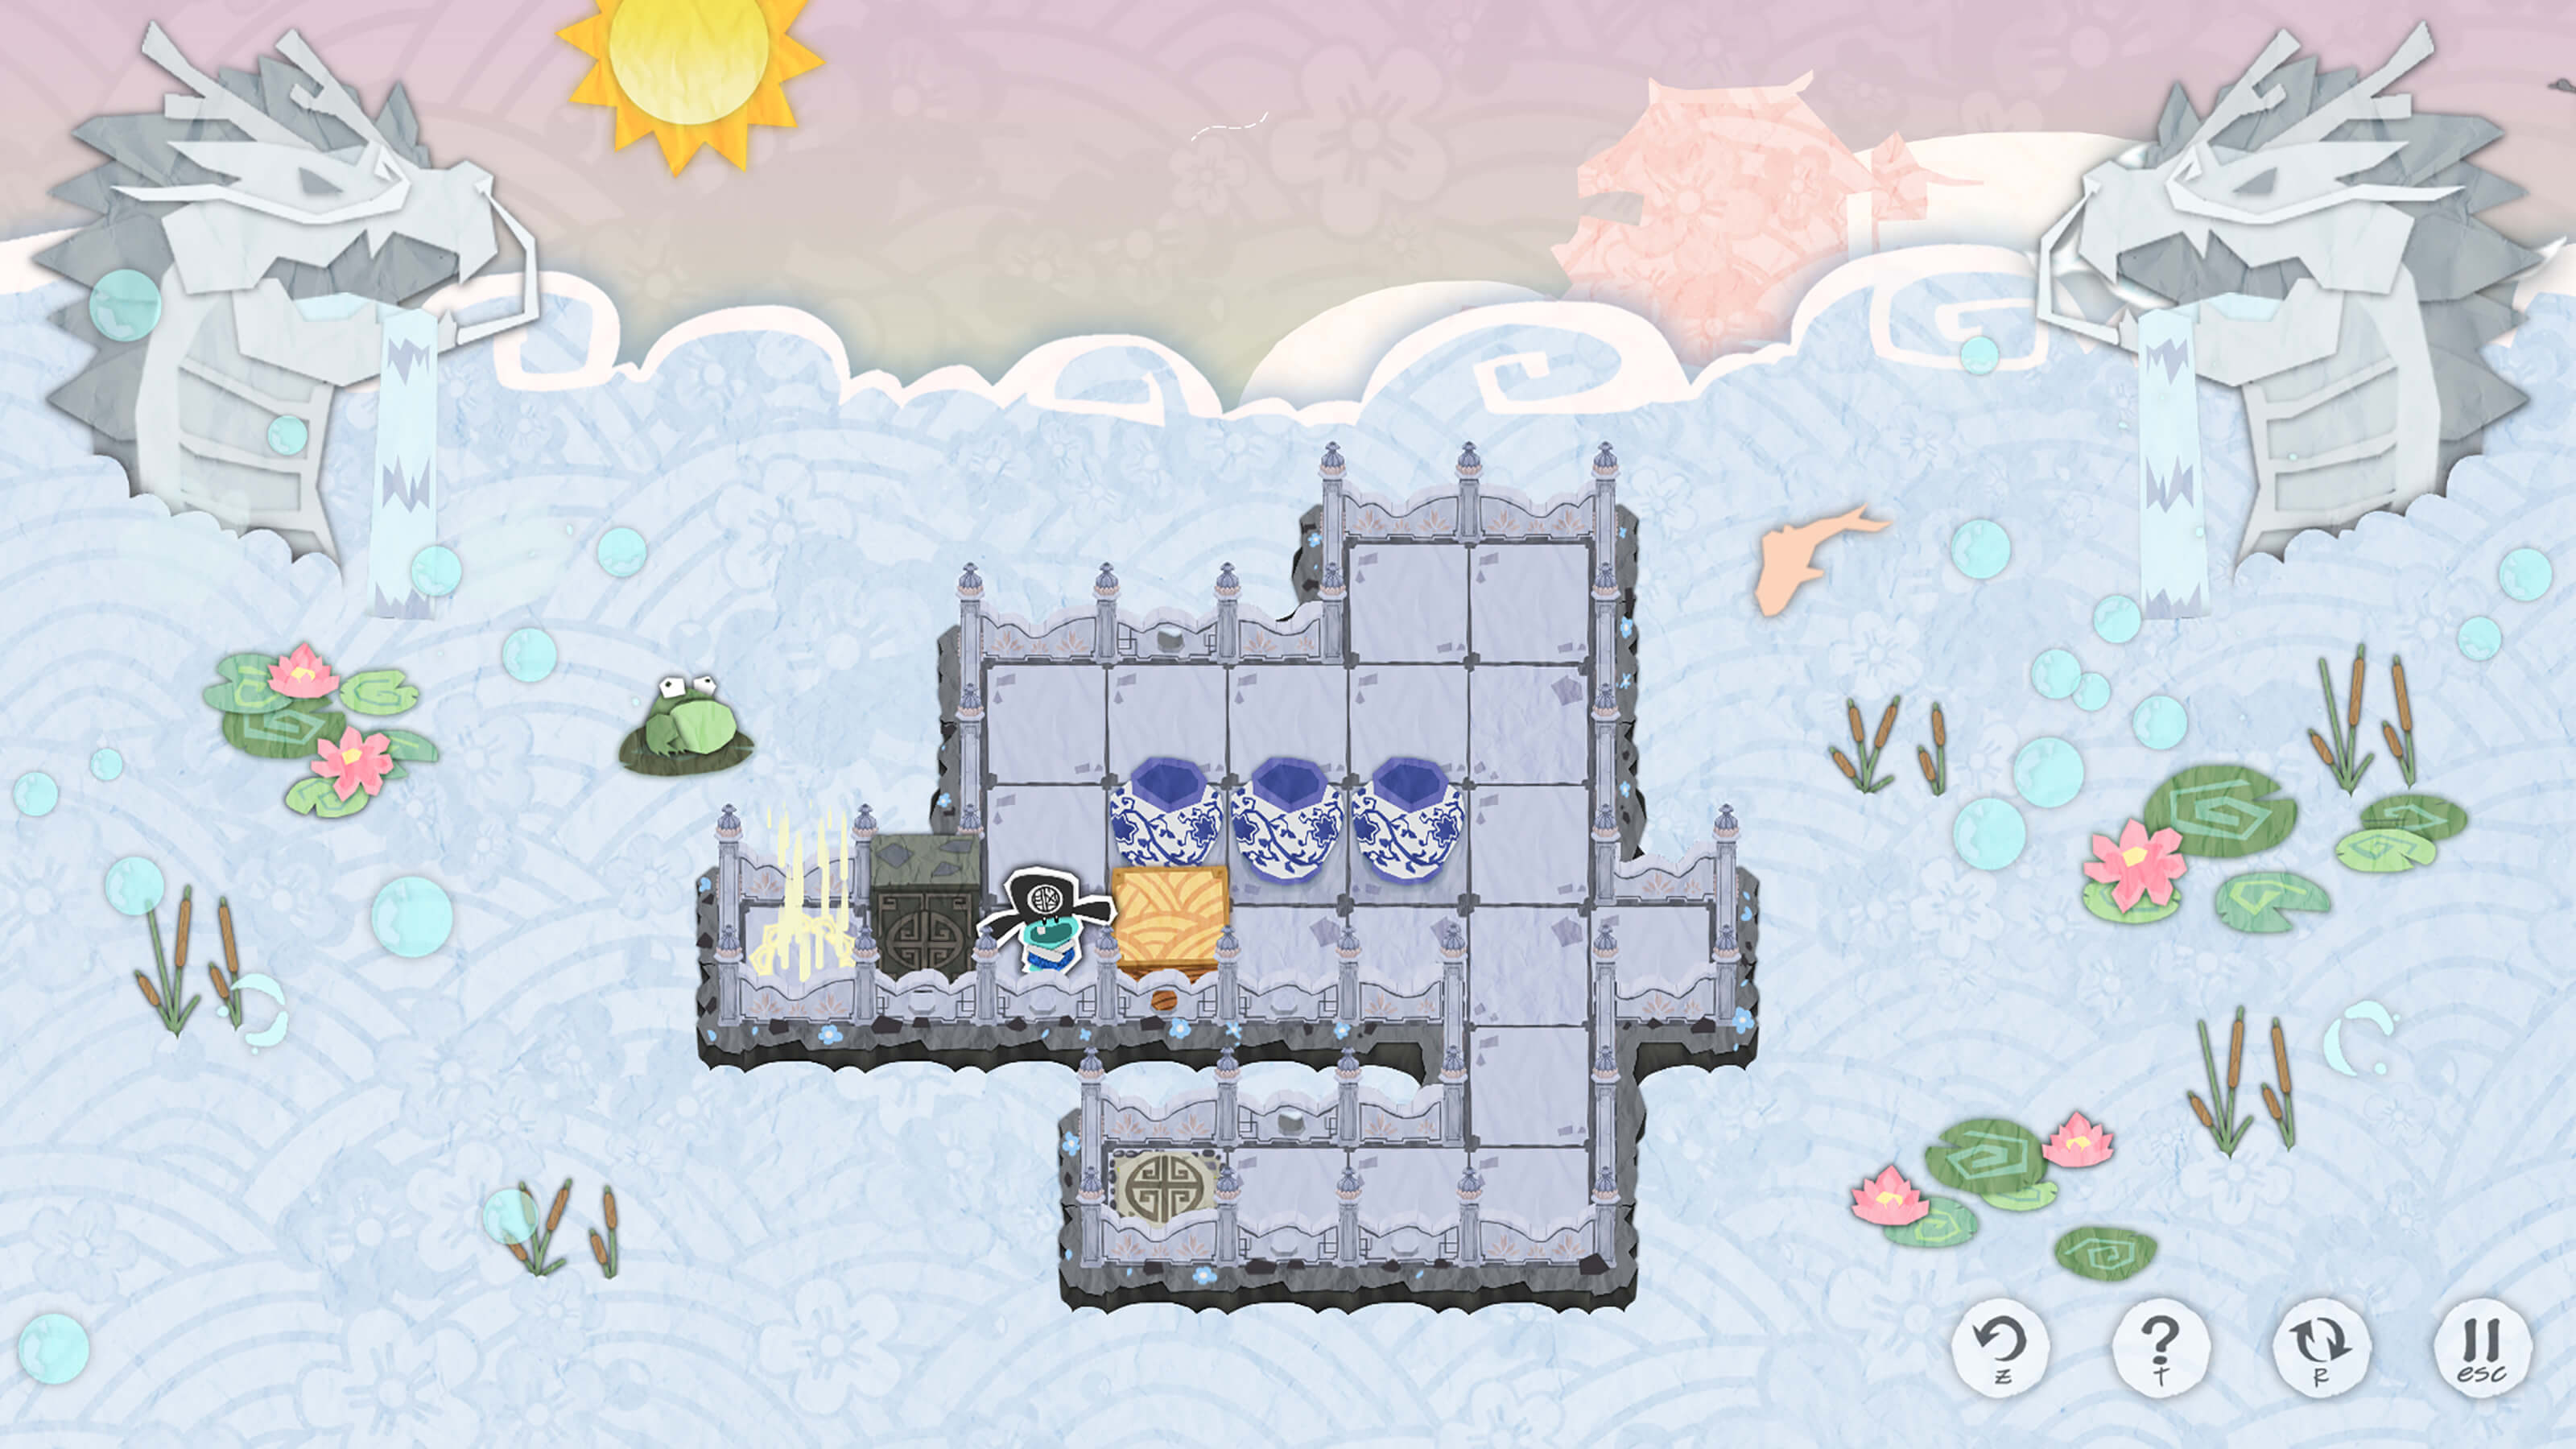 In colorful papercraft-style game art with a watery background, a small blue character stands on a gray puzzle grid platform.